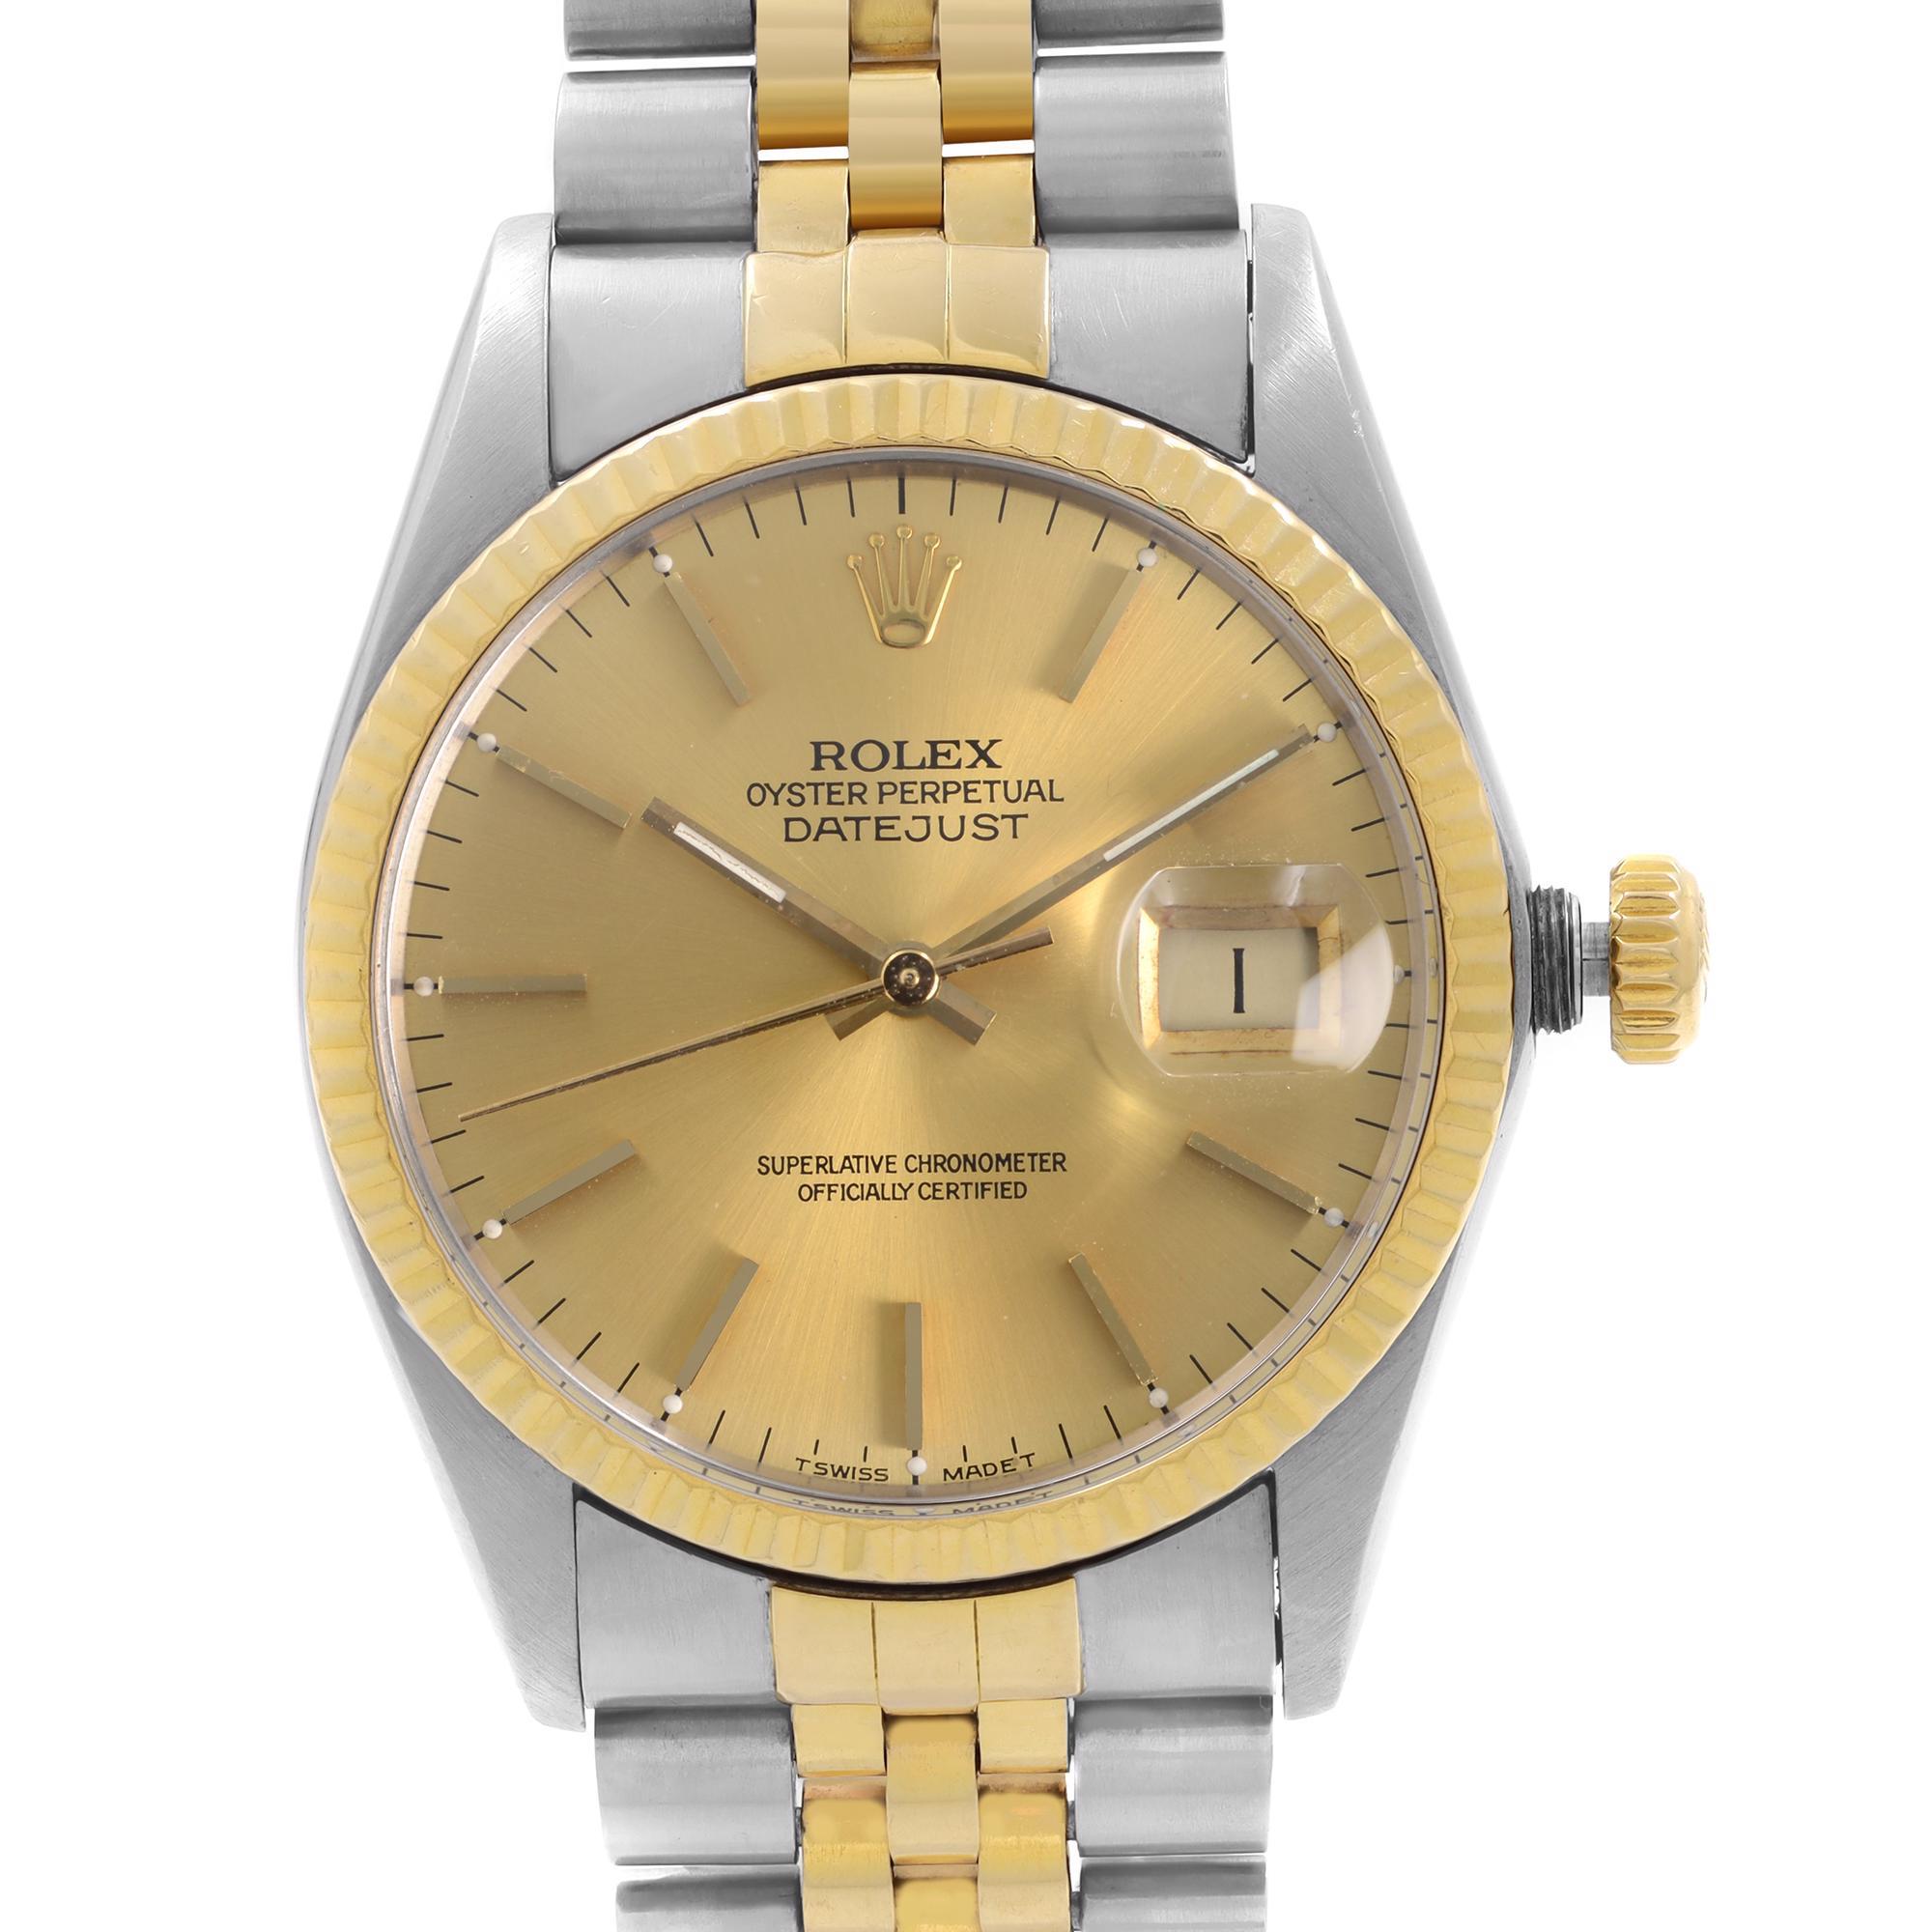 Pre-owned Rolex Datejust 36mm Steel 18k Yellow Gold Champagne Dial Automatic Watch 16013. This Watch Was Produced in 1987. The Watch Bracelet Has an obvious Slack due to it's age and some hairline scratches on the Dial, visible under thorough